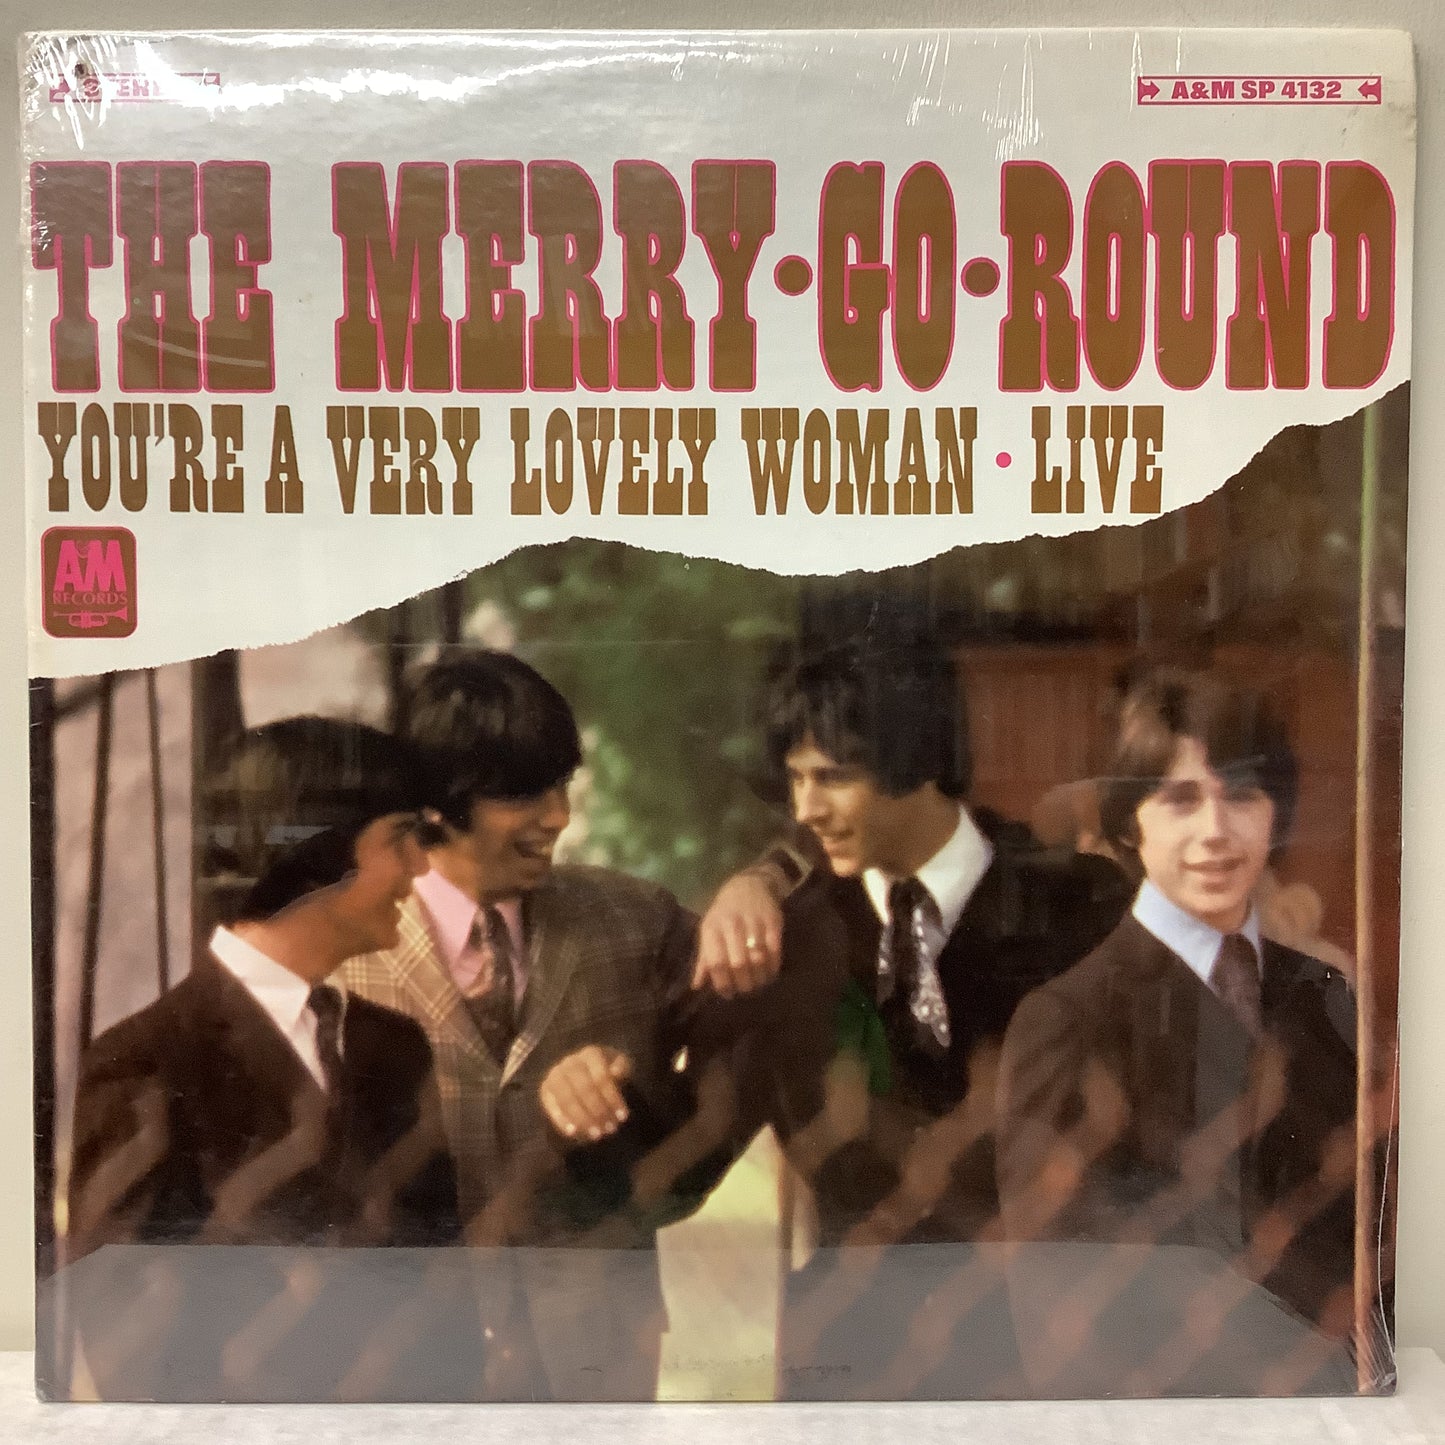 The Merry-Go-Round - You're A Very Lovely Woman Live - A&M LP